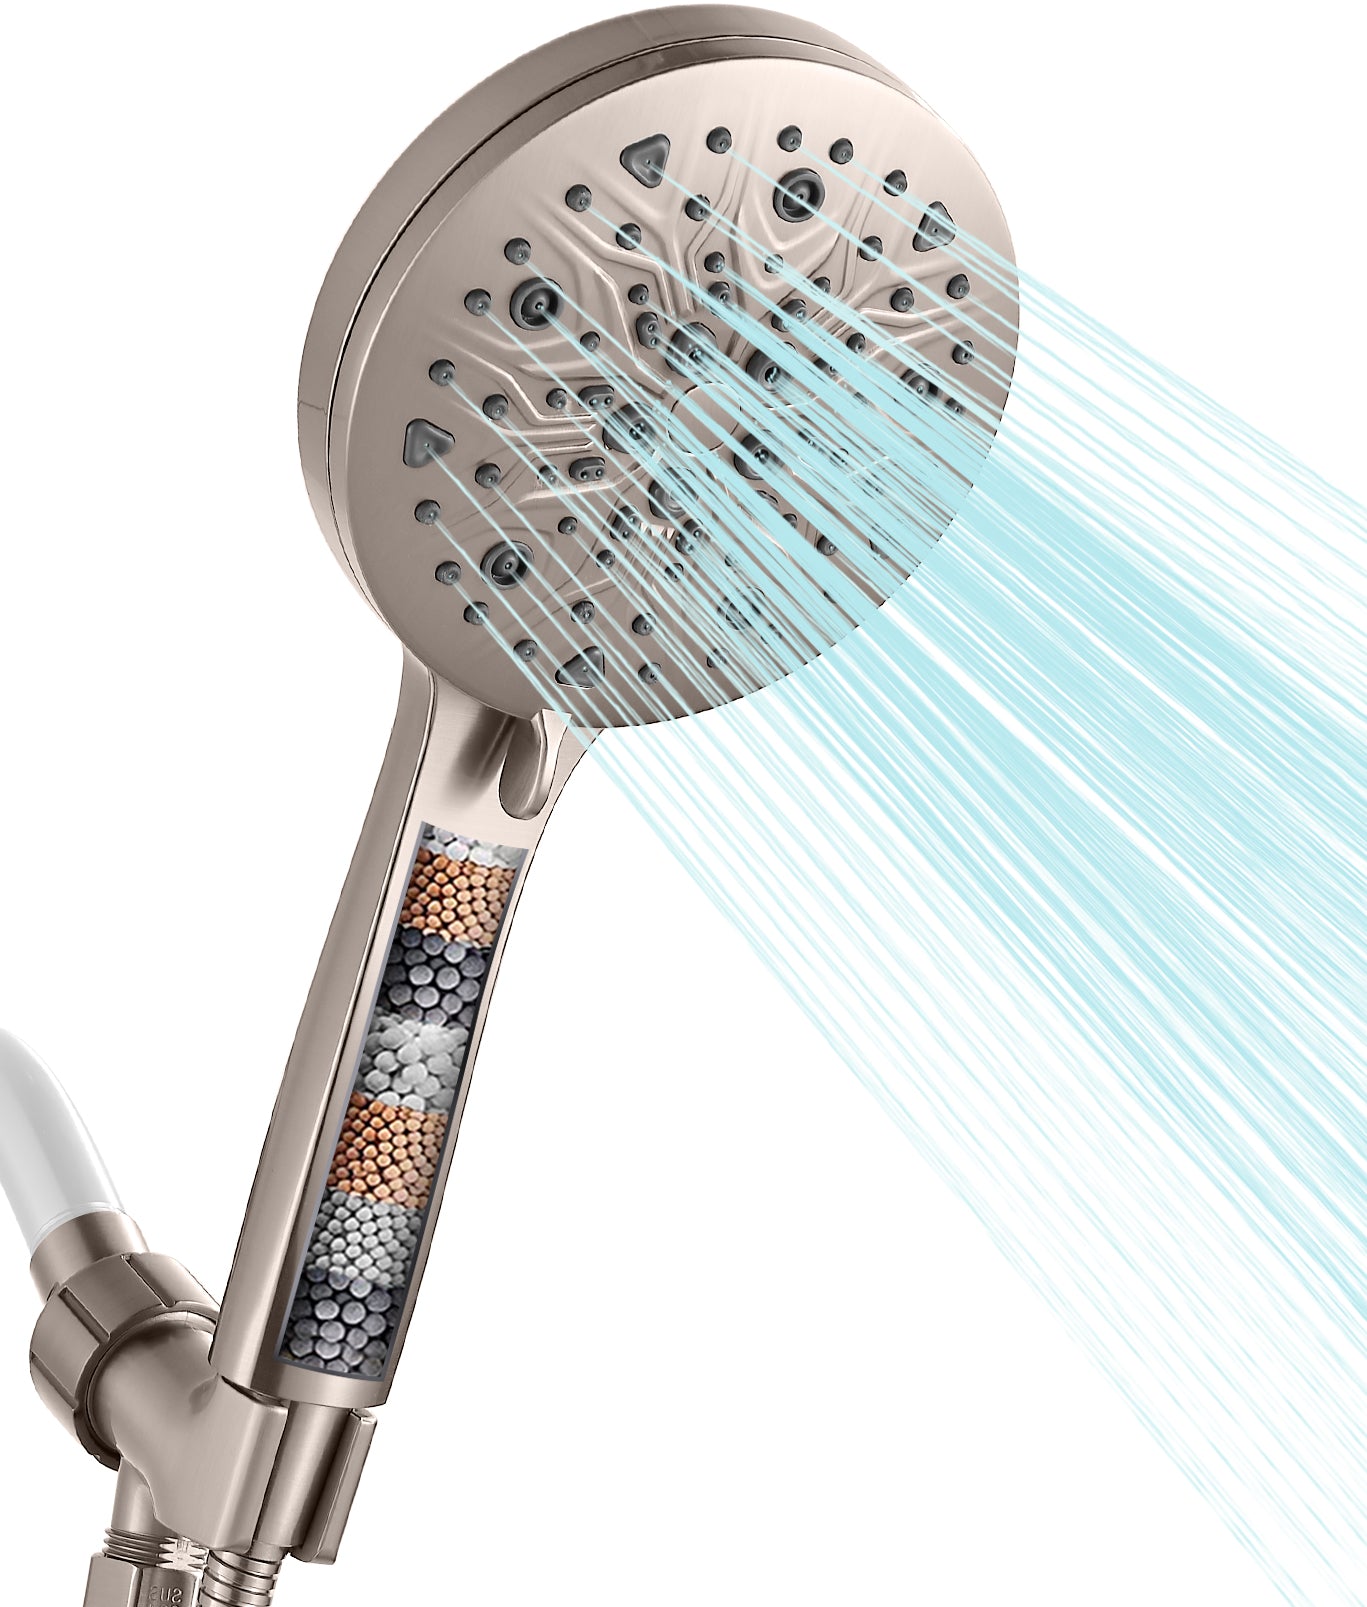 Cobbe 8 Spray Mode Handheld Shower Head with Filter High Pressure 5.11" Shower Head Set, and Hard Water Filter Shower Head